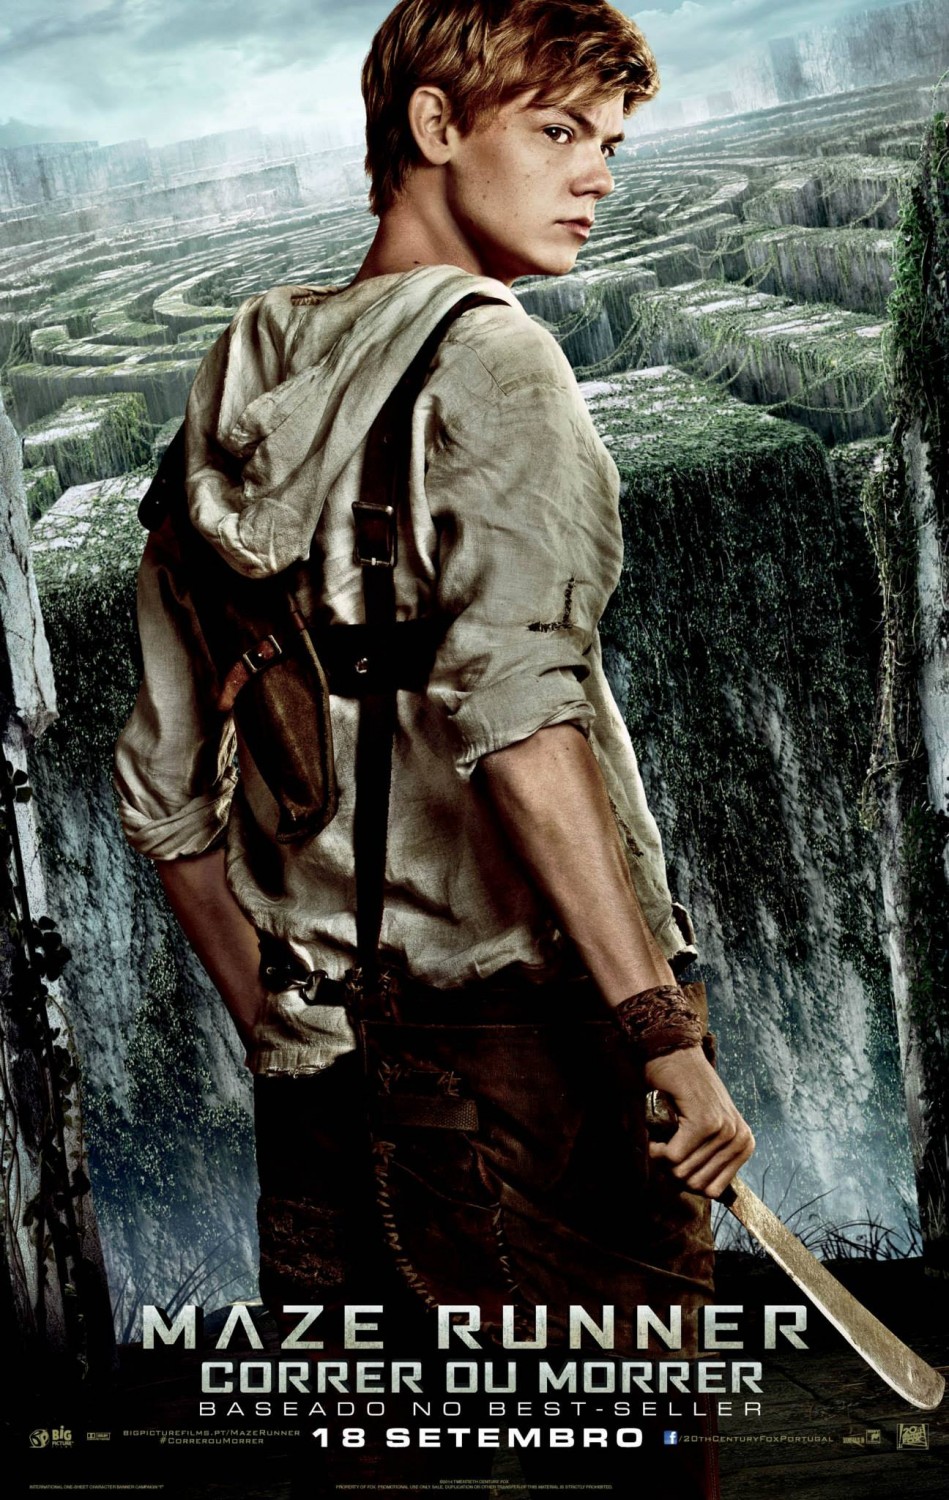 Extra Large Movie Poster Image for The Maze Runner (#21 of 24)